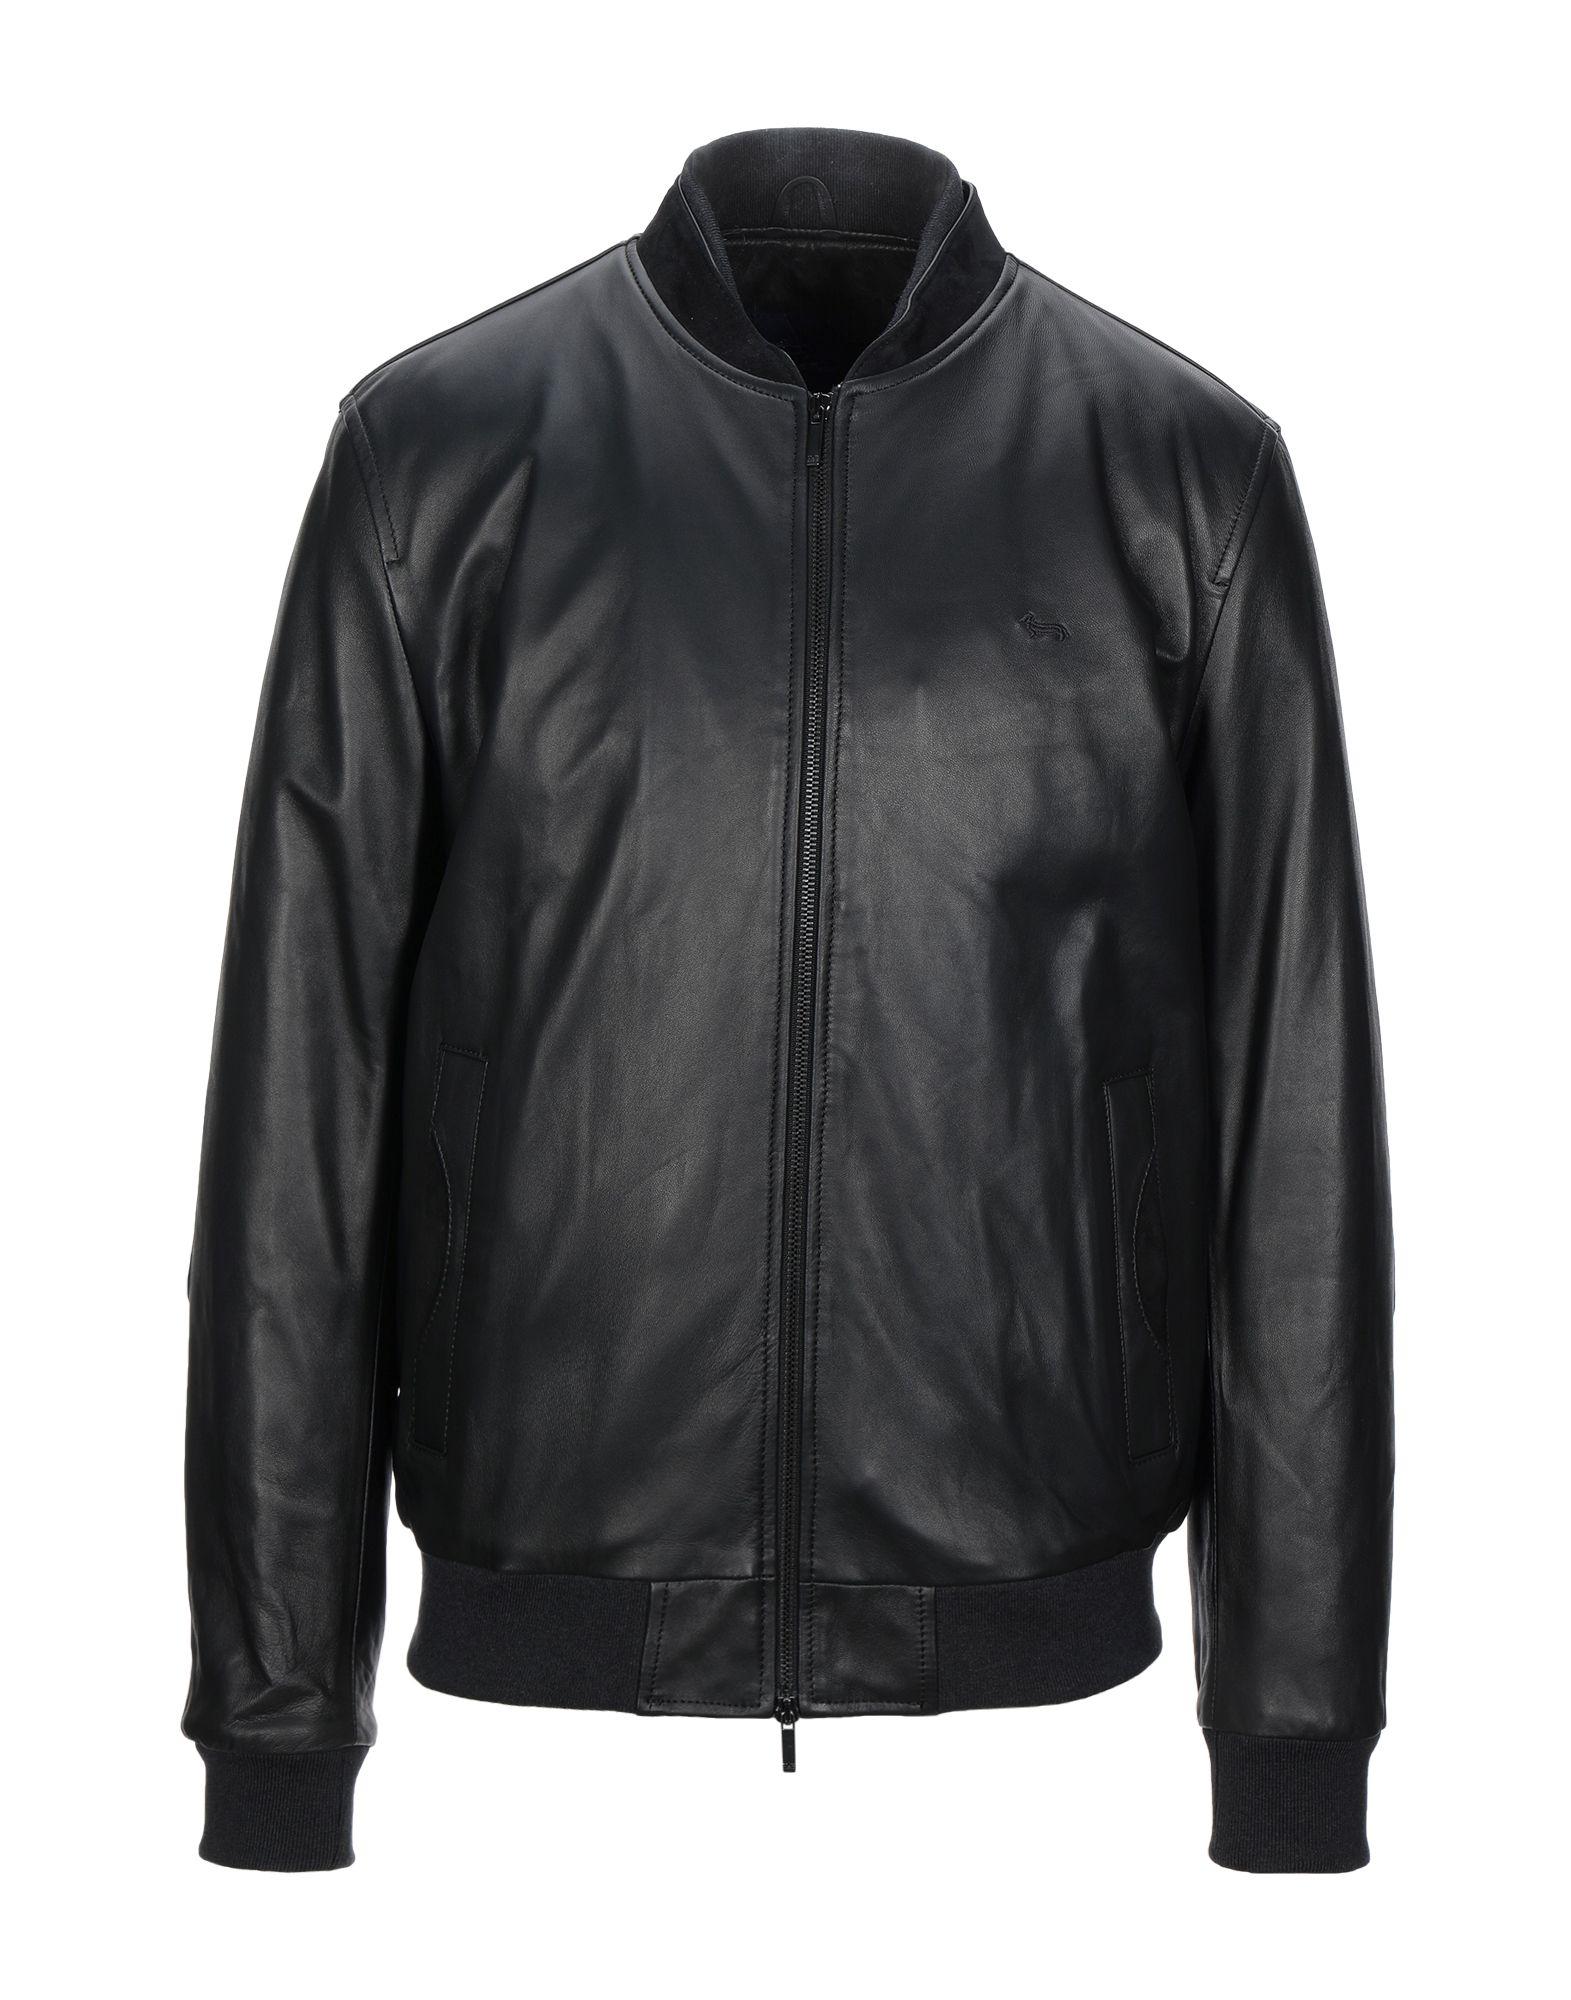 Harmont & Blaine Leather Jacket in Black for Men - Lyst